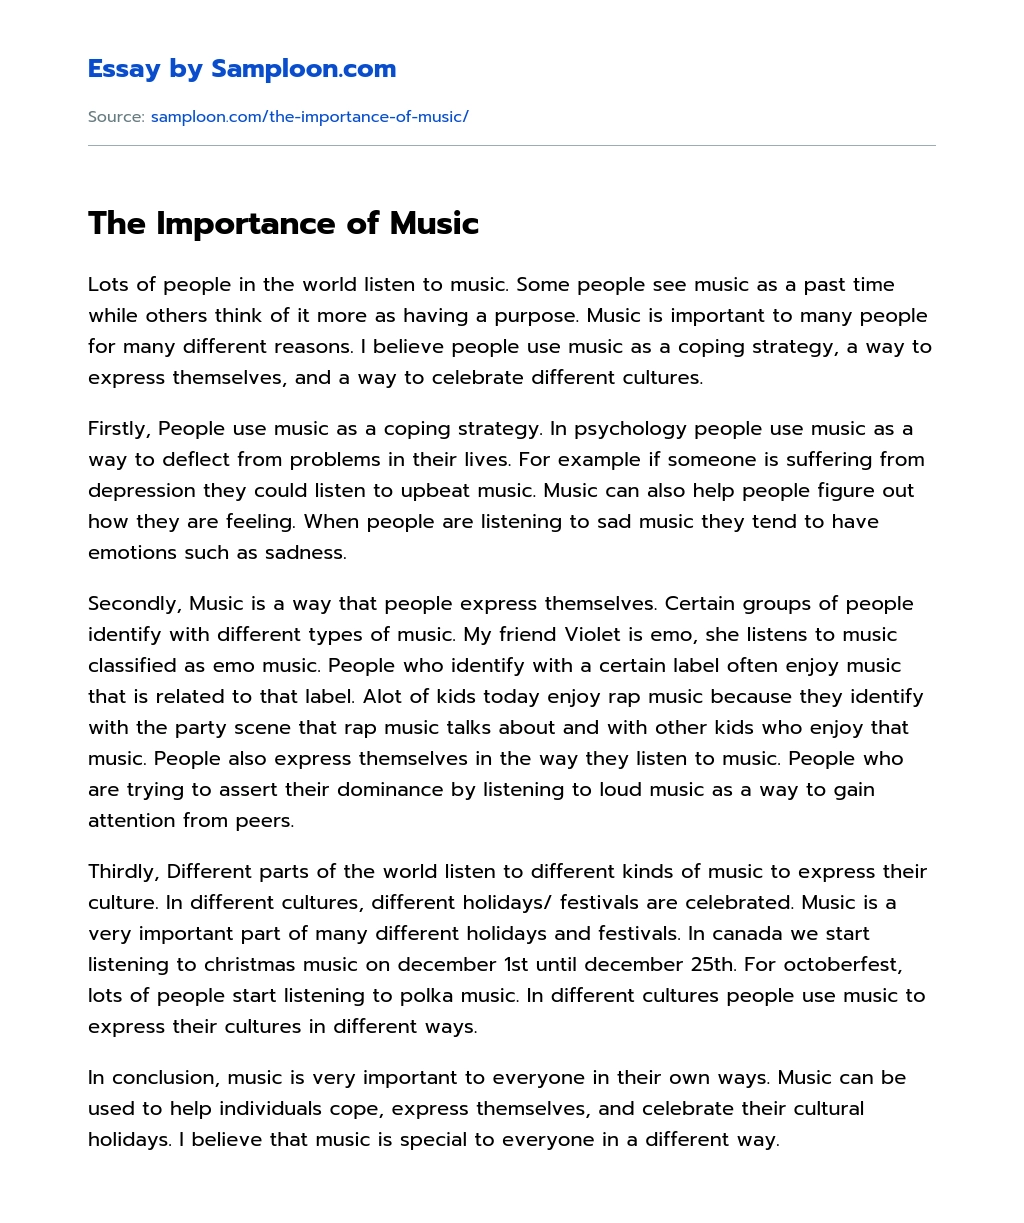 ≫ The Importance of Music Free Essay Sample on Samploon.com